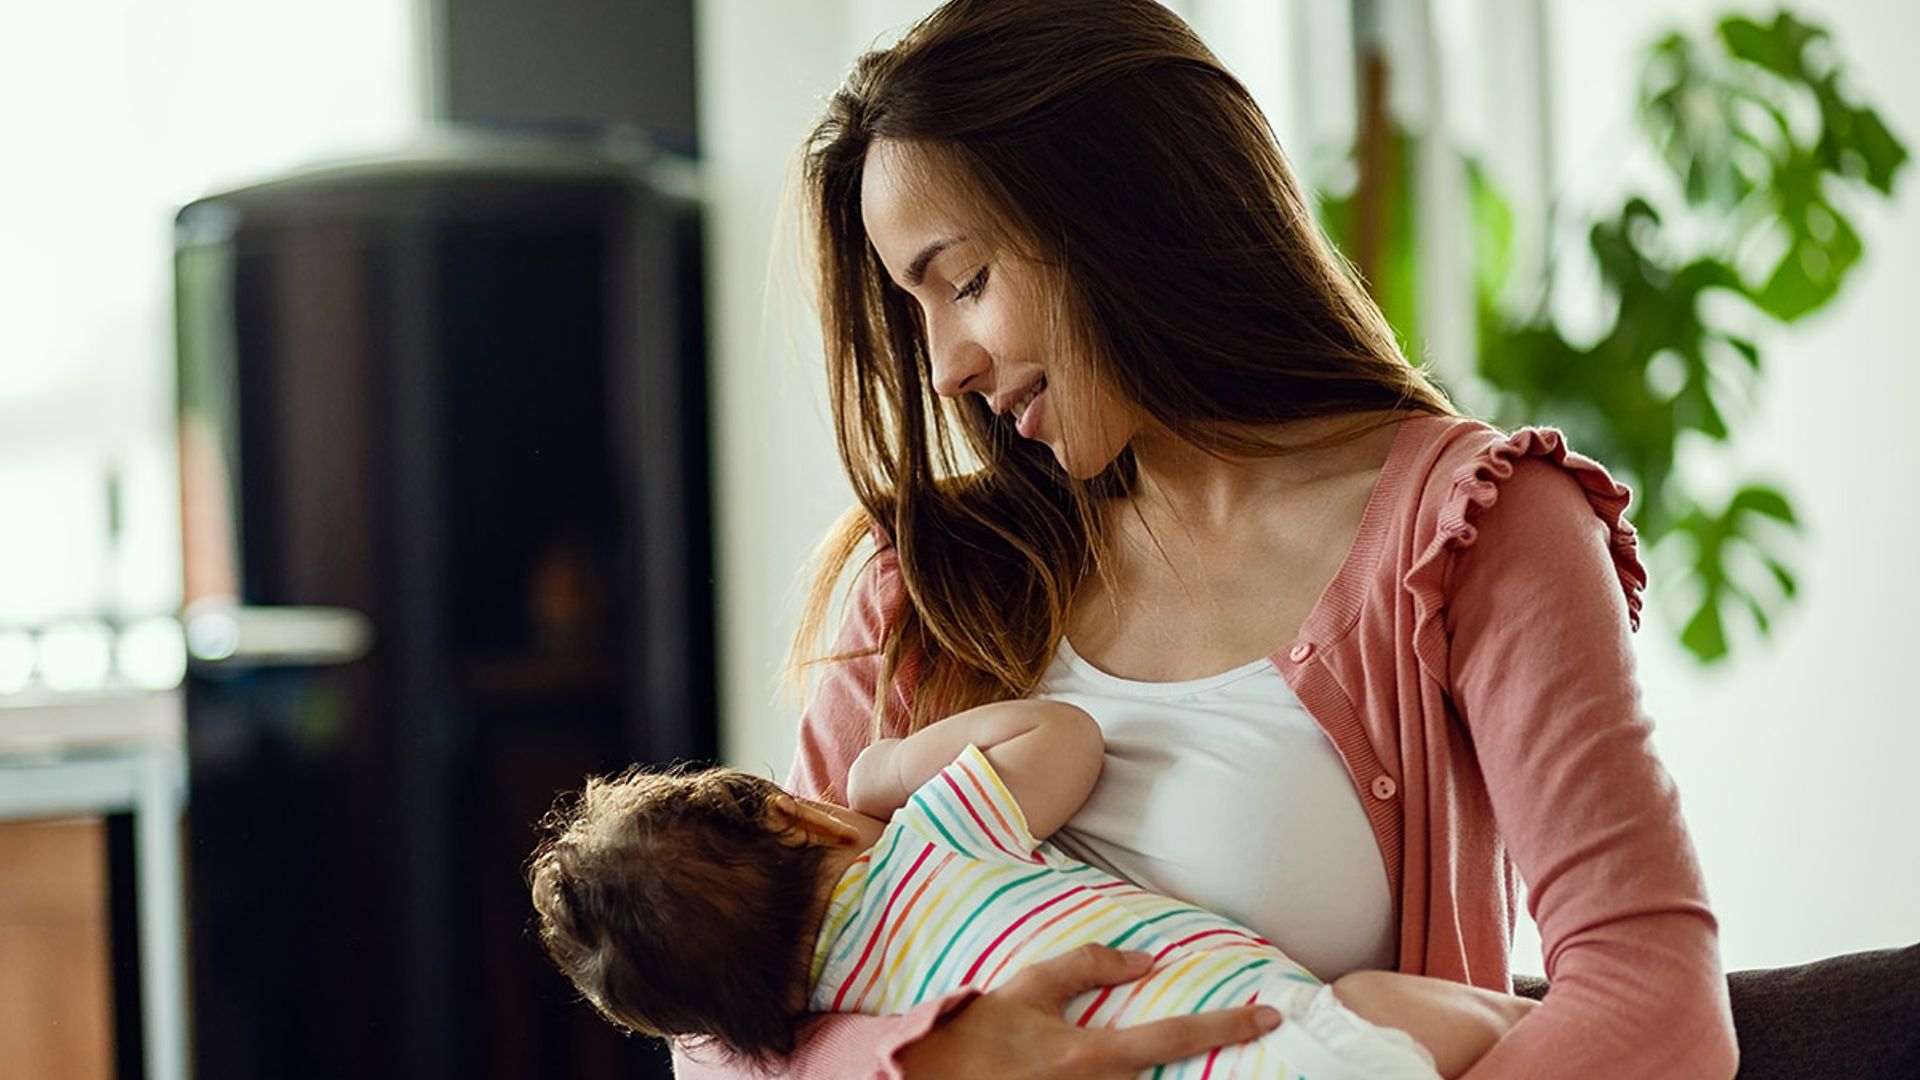 7 helpful breastfeeding tips for mums from an infant feeding expert